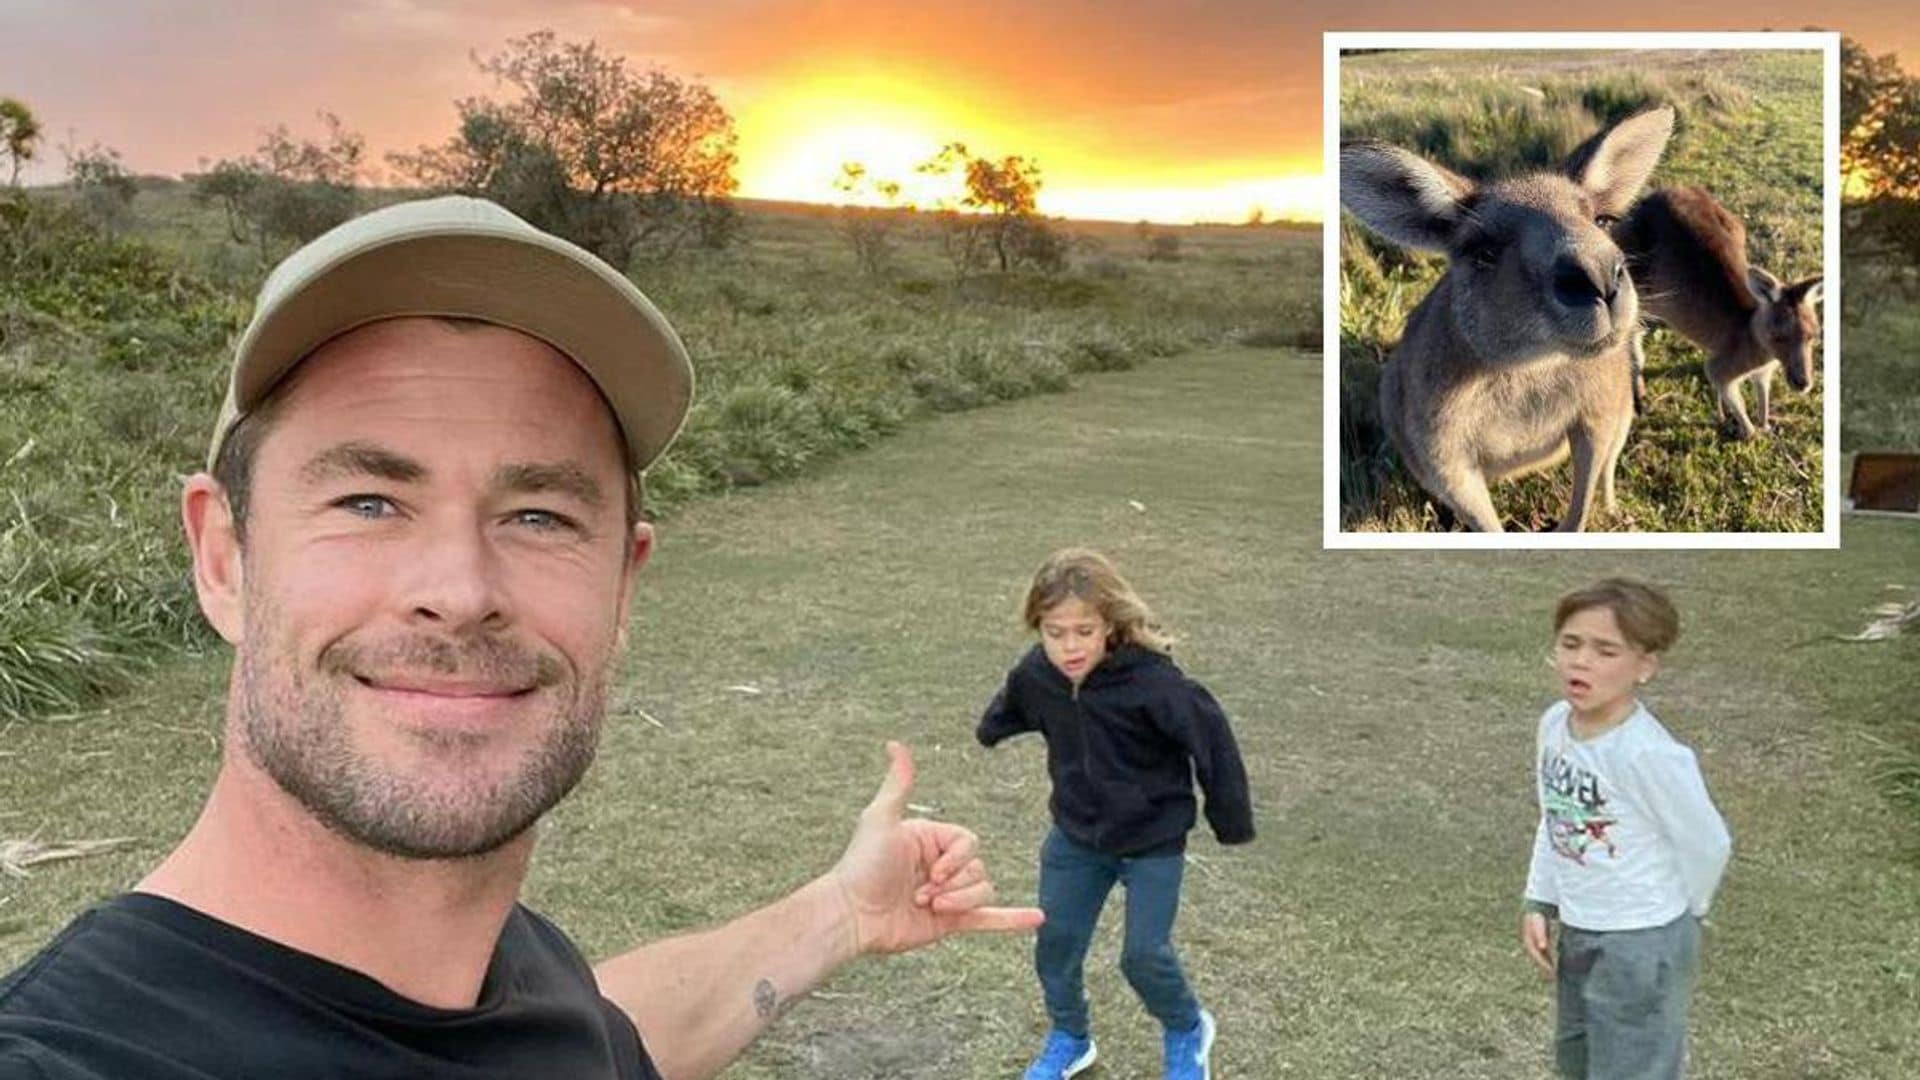 Chris Hemsworth has an epic camping trip with his boys and wrestles kangaroos